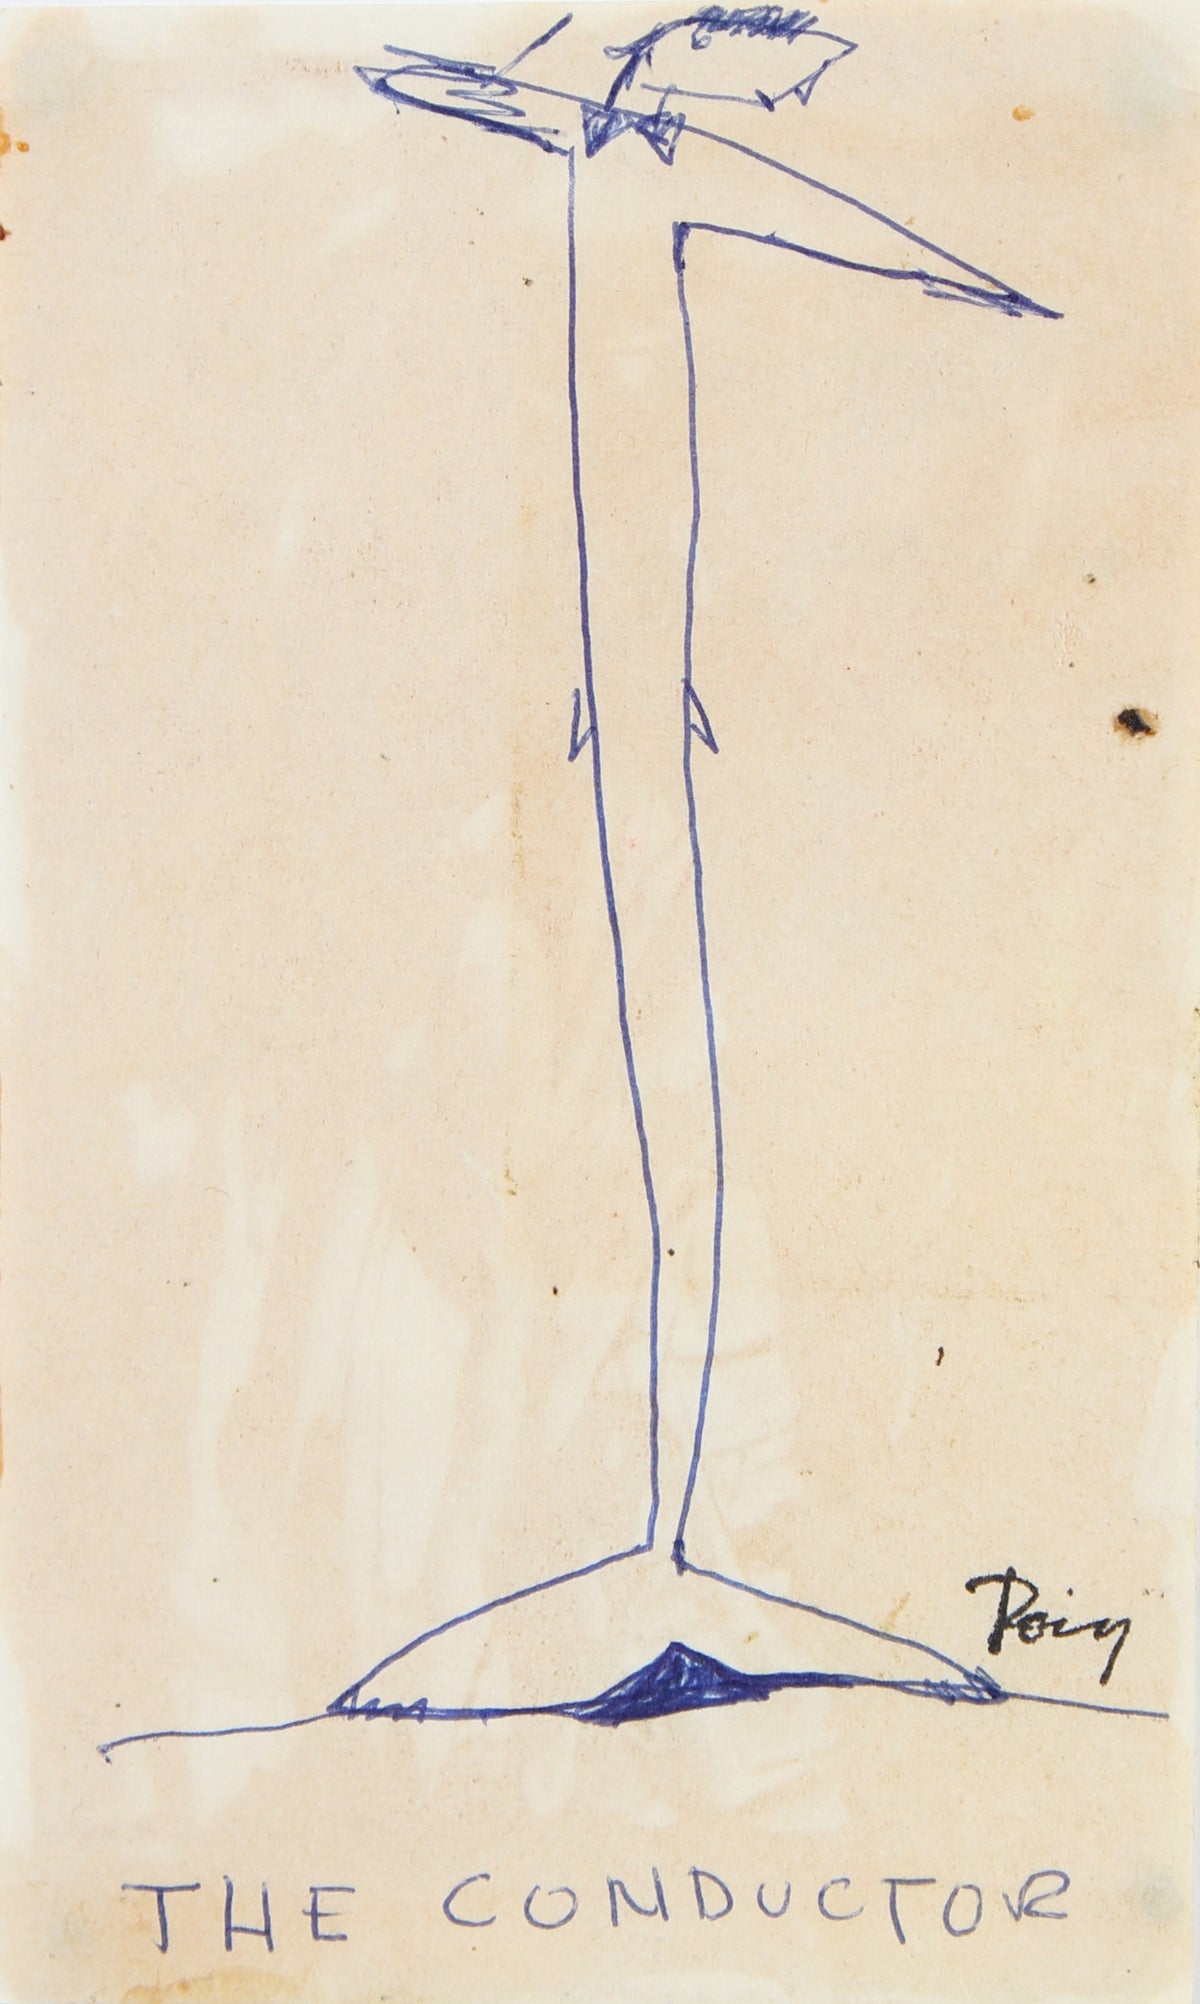 &lt;i&gt;The Conductor (the birds, with clay feet)&lt;/i&gt;&lt;br&gt;Late 1960s Ink&lt;br&gt;&lt;br&gt;#96871